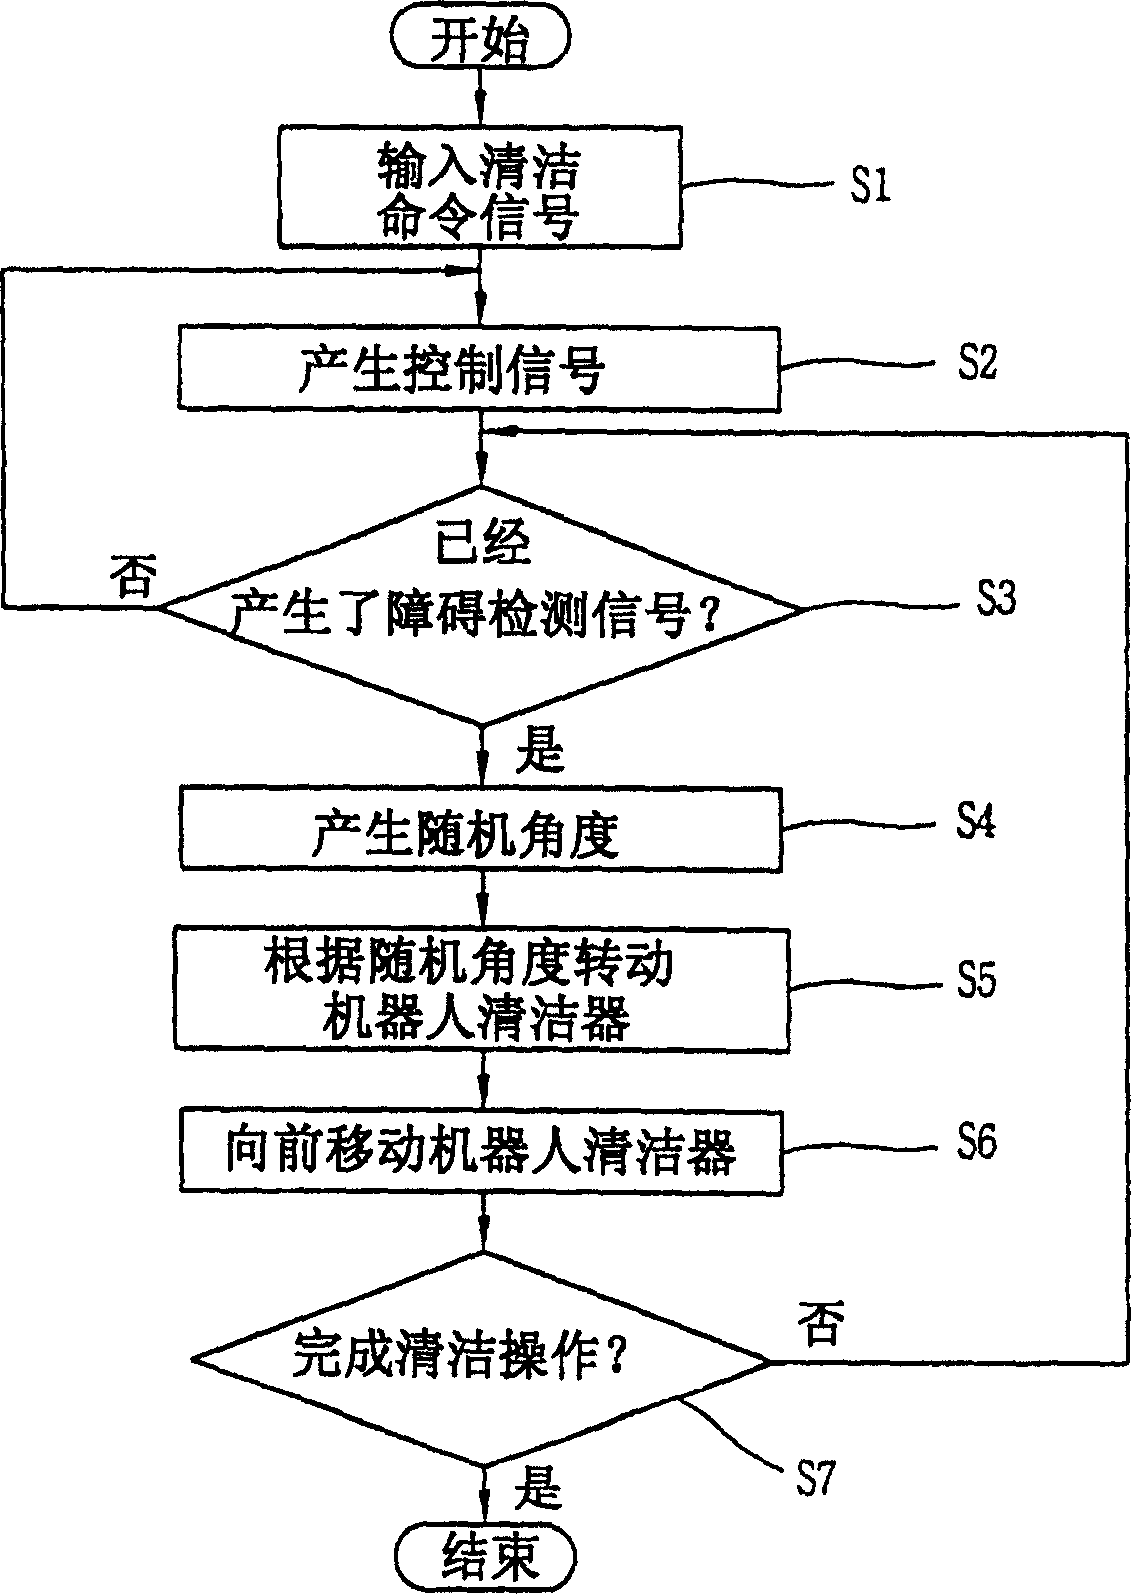 Apparatus and method for calling mobile robot